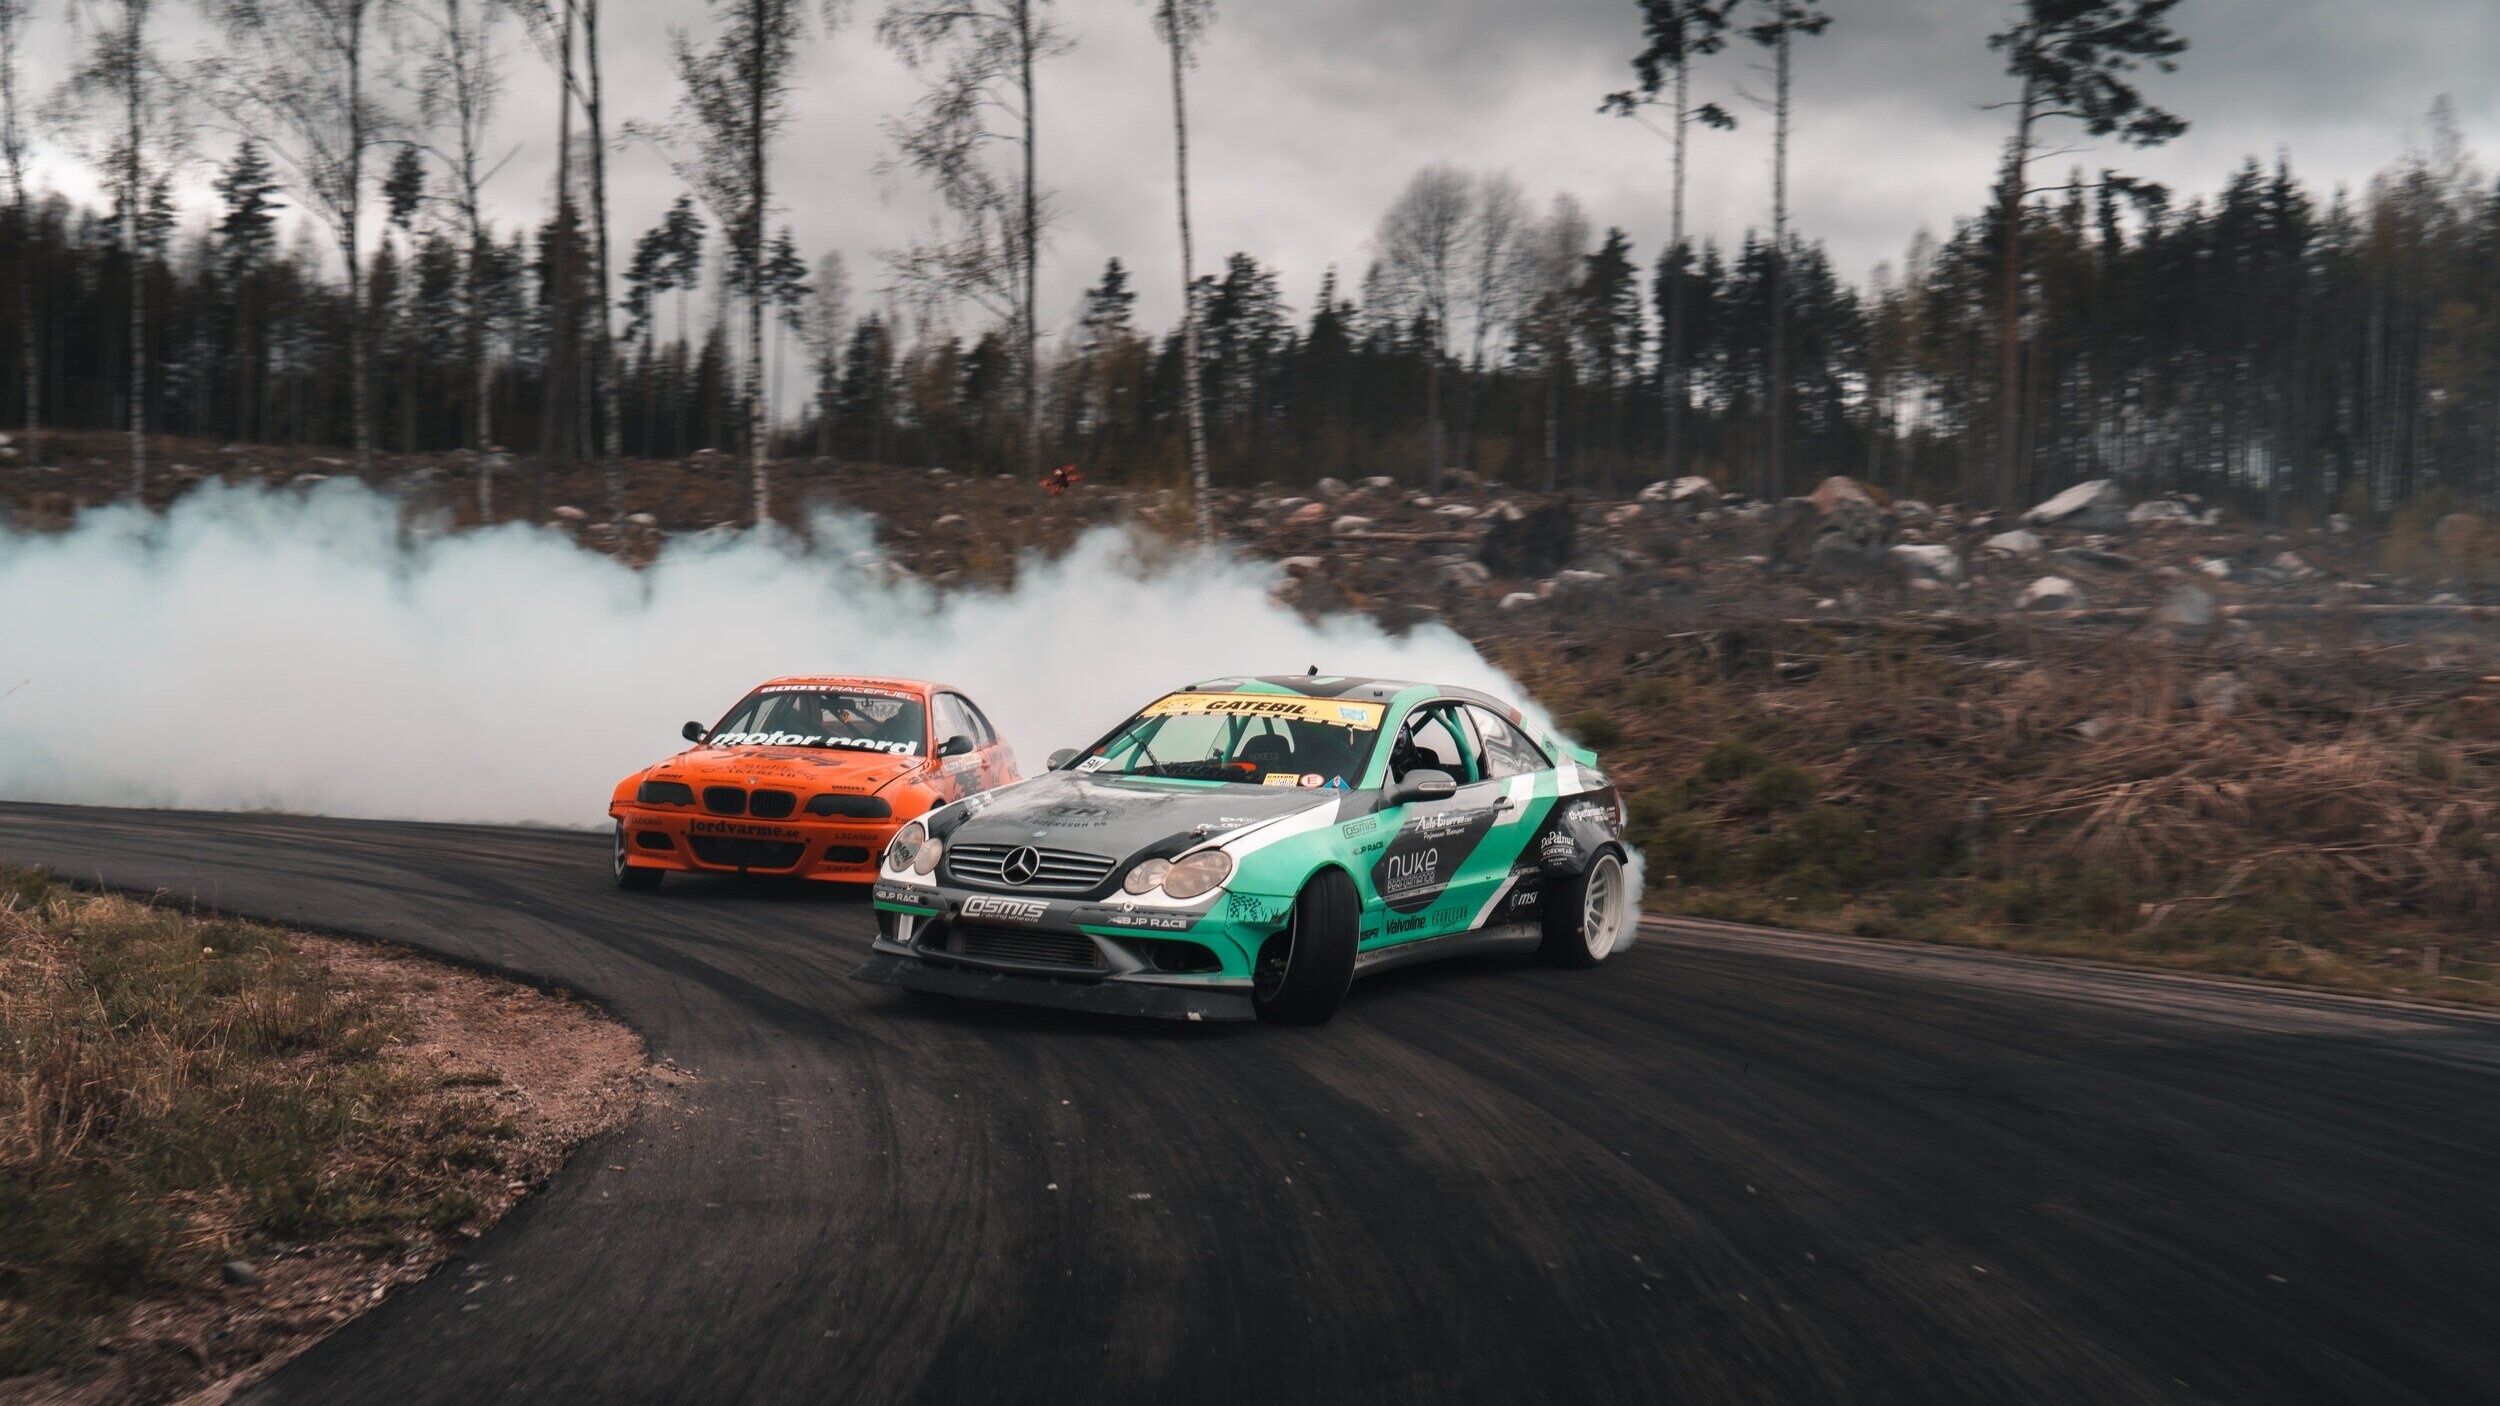 Drifting: Mercedes C-Class Coupe vs. BMW, Extreme turning during the race, Smoking tires. 2500x1410 HD Background.